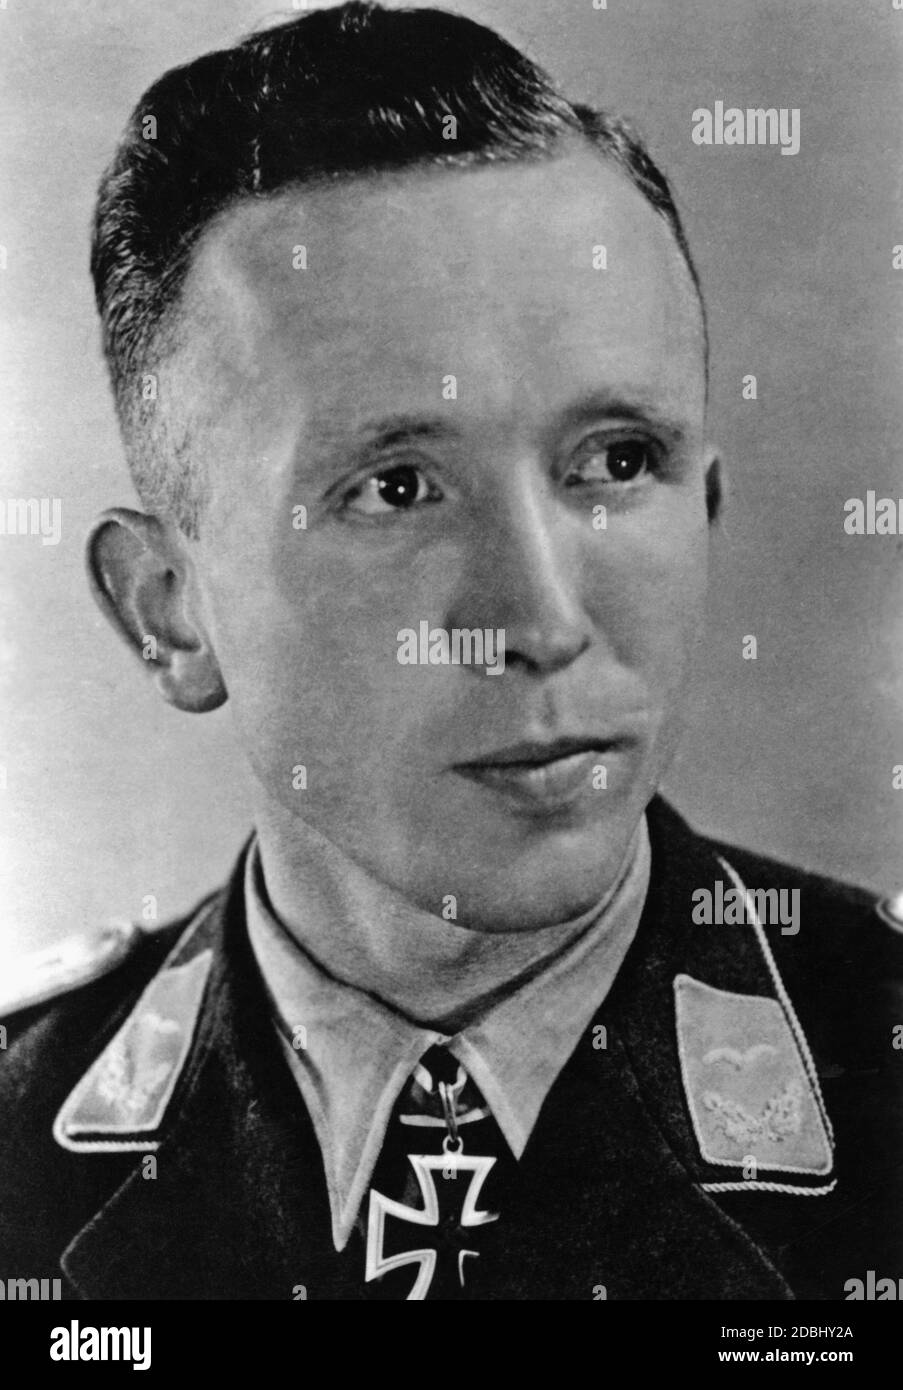 Lieutenant Horst Ademeit, I. / Jagdgeschwader 54, with the Knights Cross. The date specifies the date of the awarding. Stock Photo